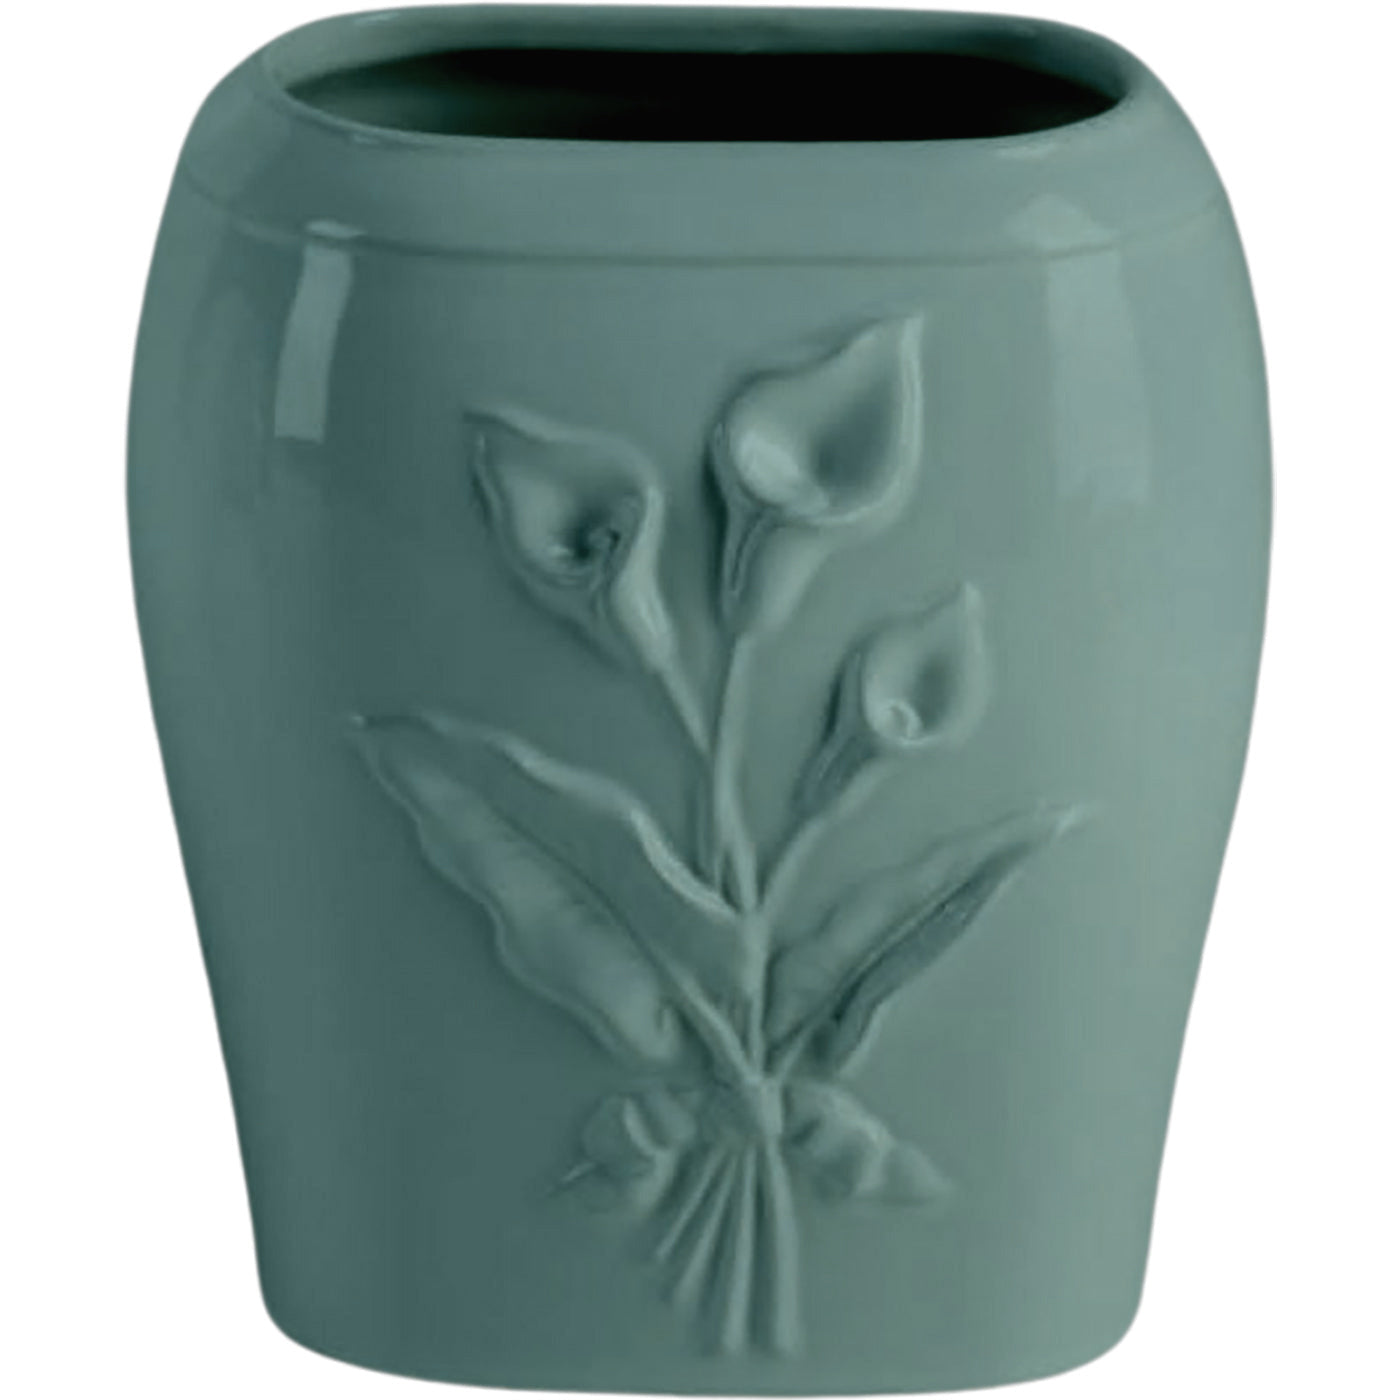 Rectangular grave vase Calla green 19x17cm - 7.5x6.7in In green porcelain, ground attached CAL160T/V